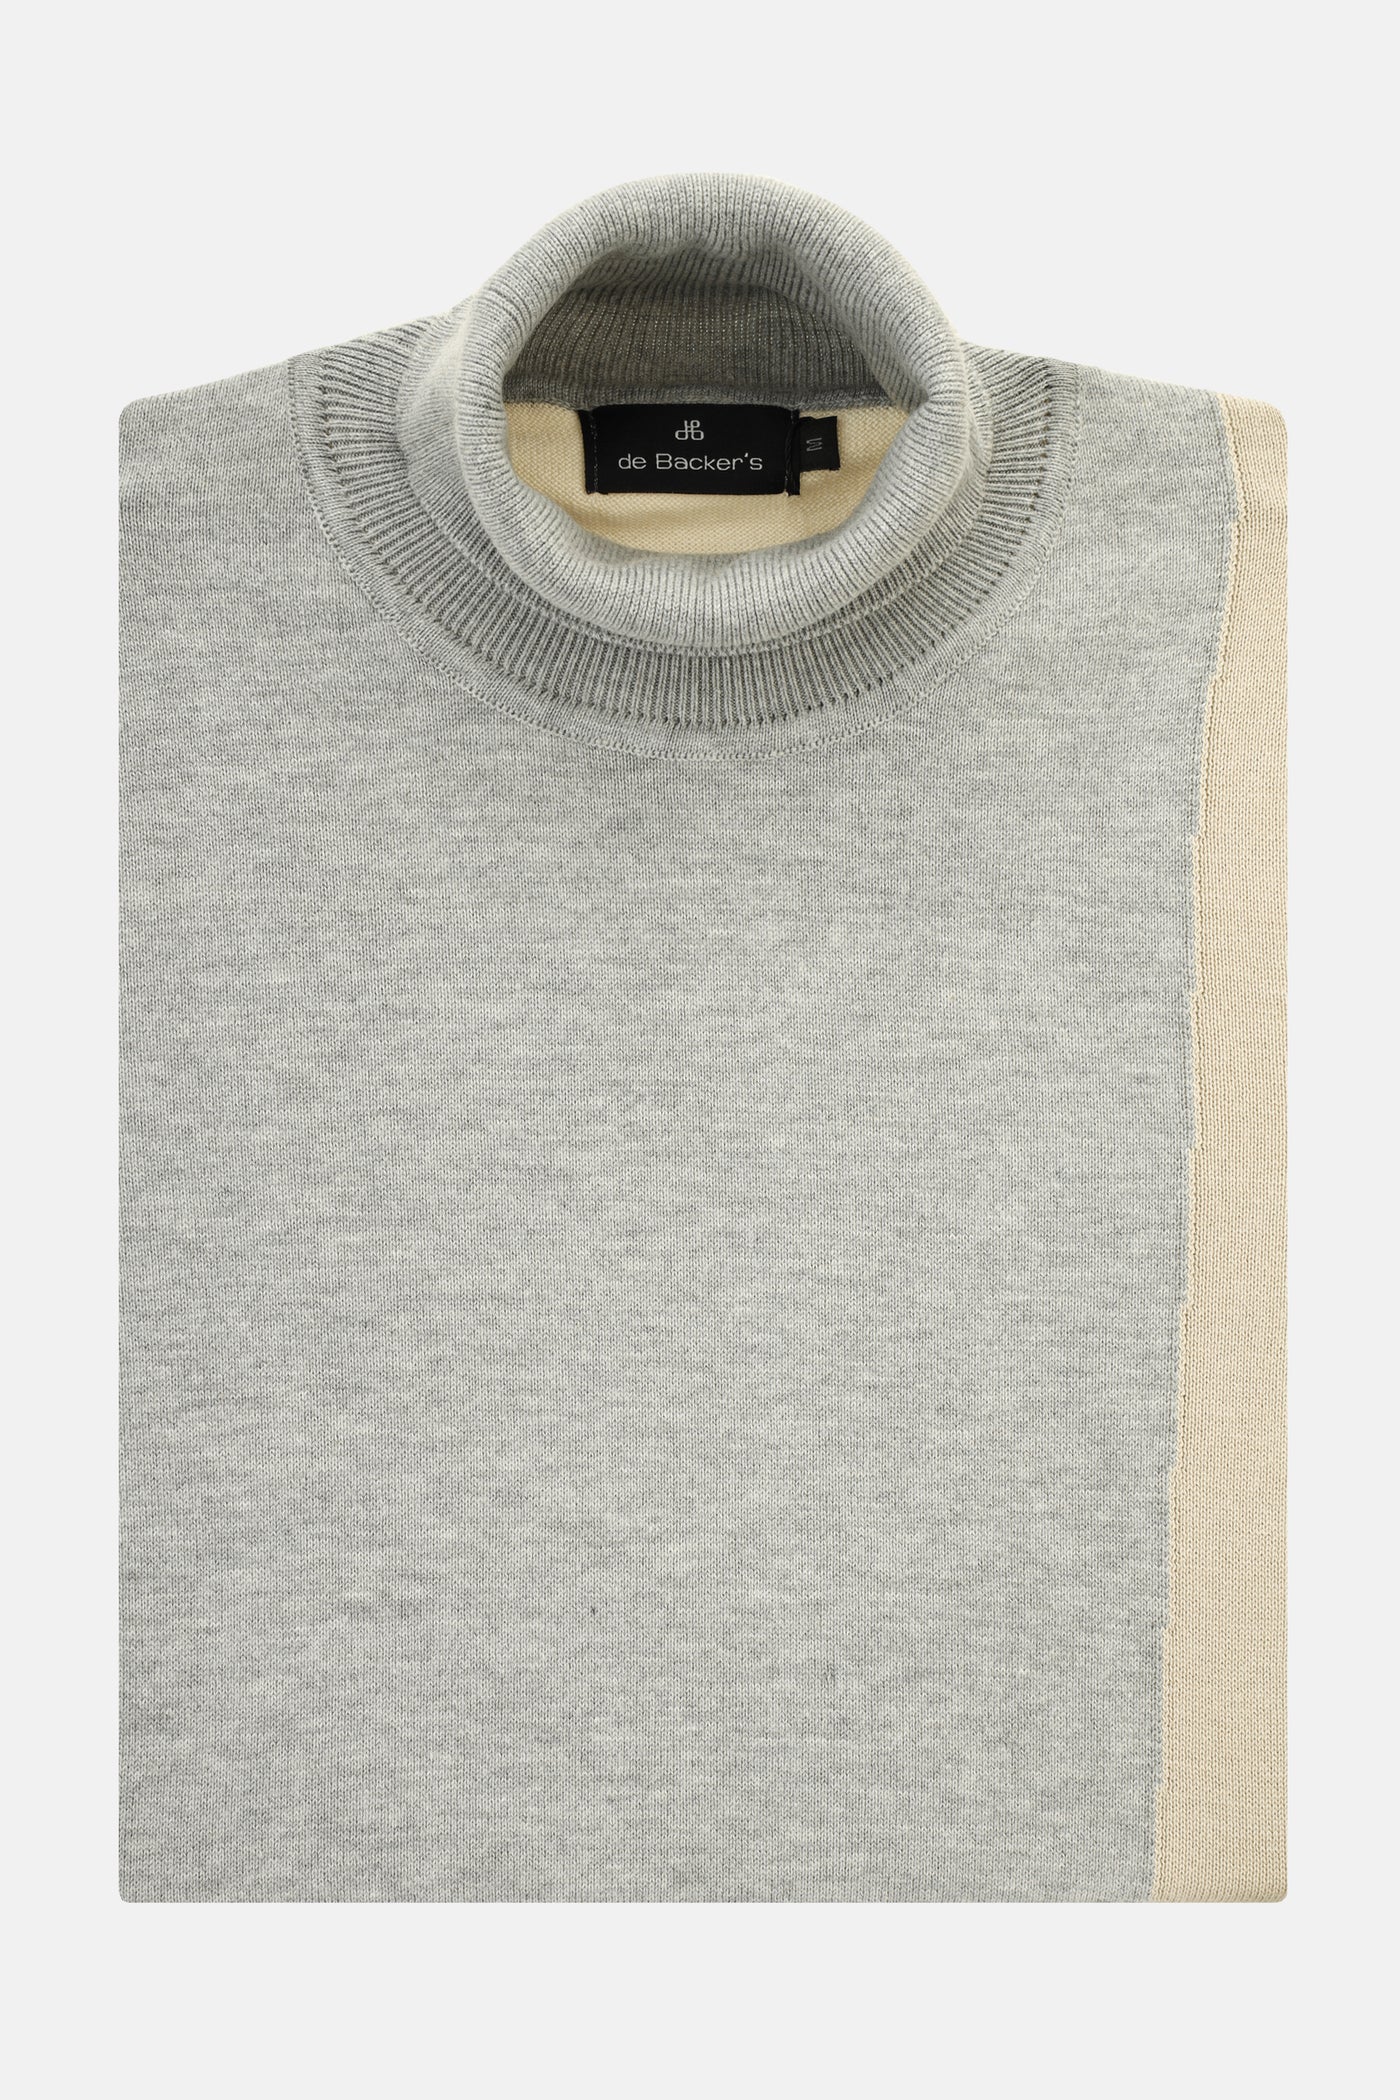 Jacquard Knitted High-neck Gray & Off White Pullover